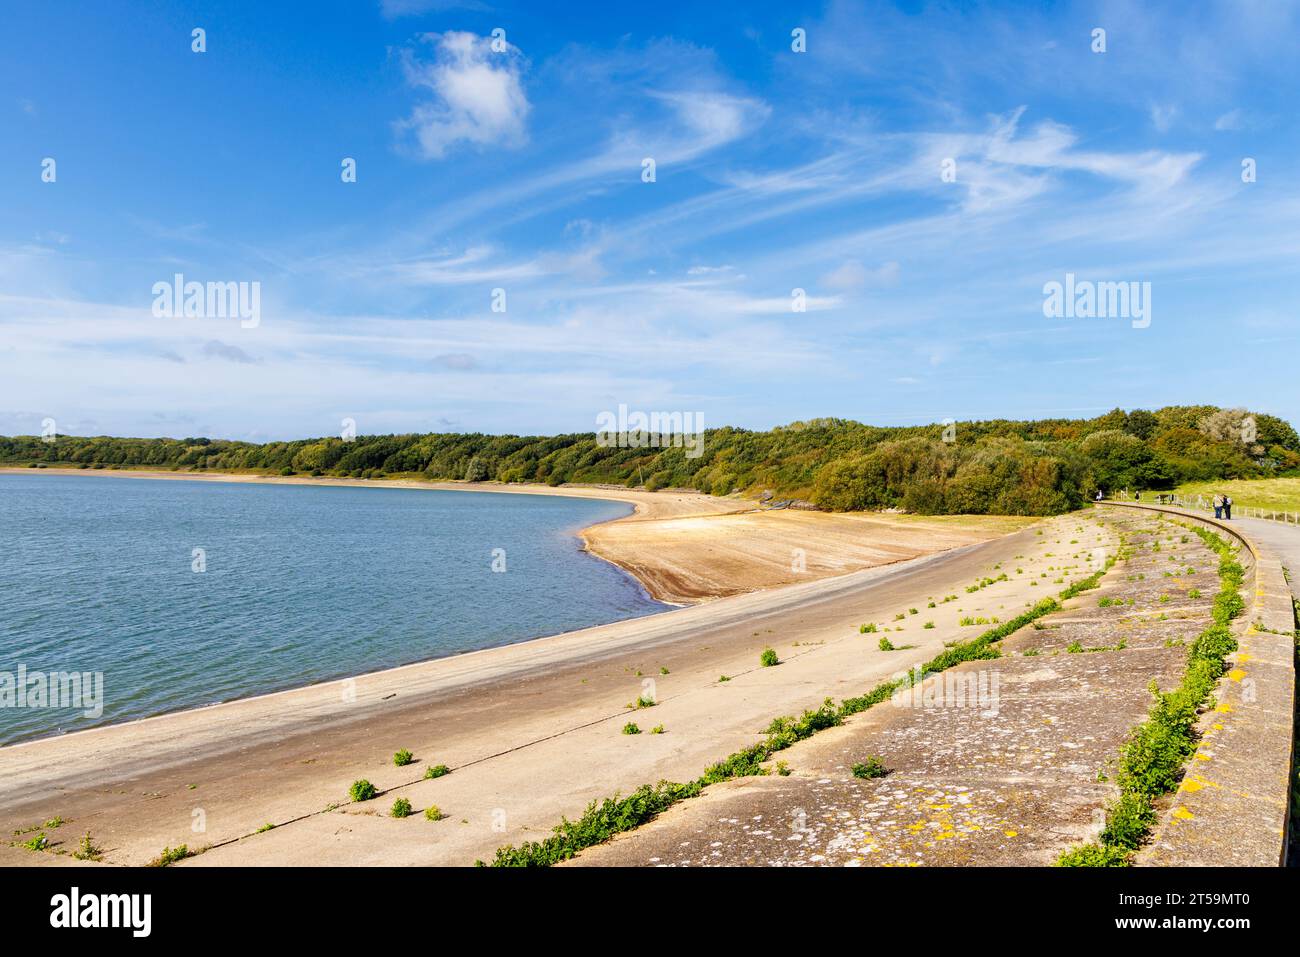 Low water level at Arlington Reservoir, a Site of Special Scientific Interest and Local Nature Reserve managed by South East Water, East Sussex Stock Photo